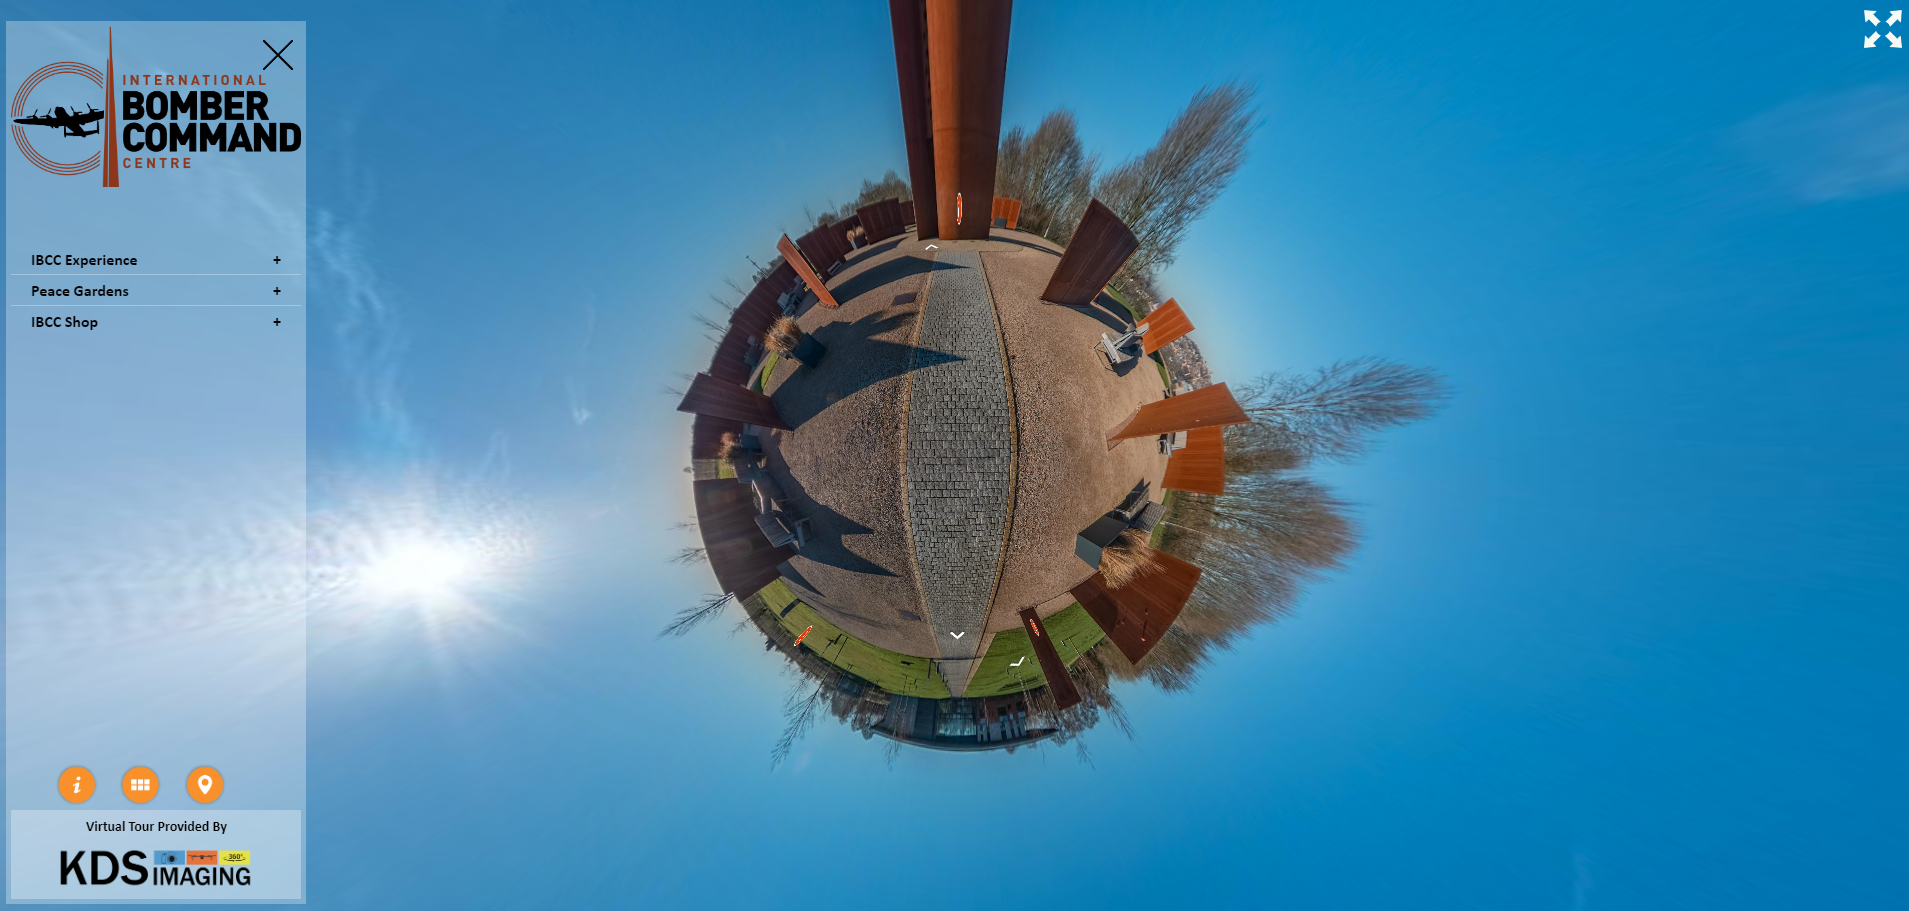 360 Image of the IBCC in little planet style